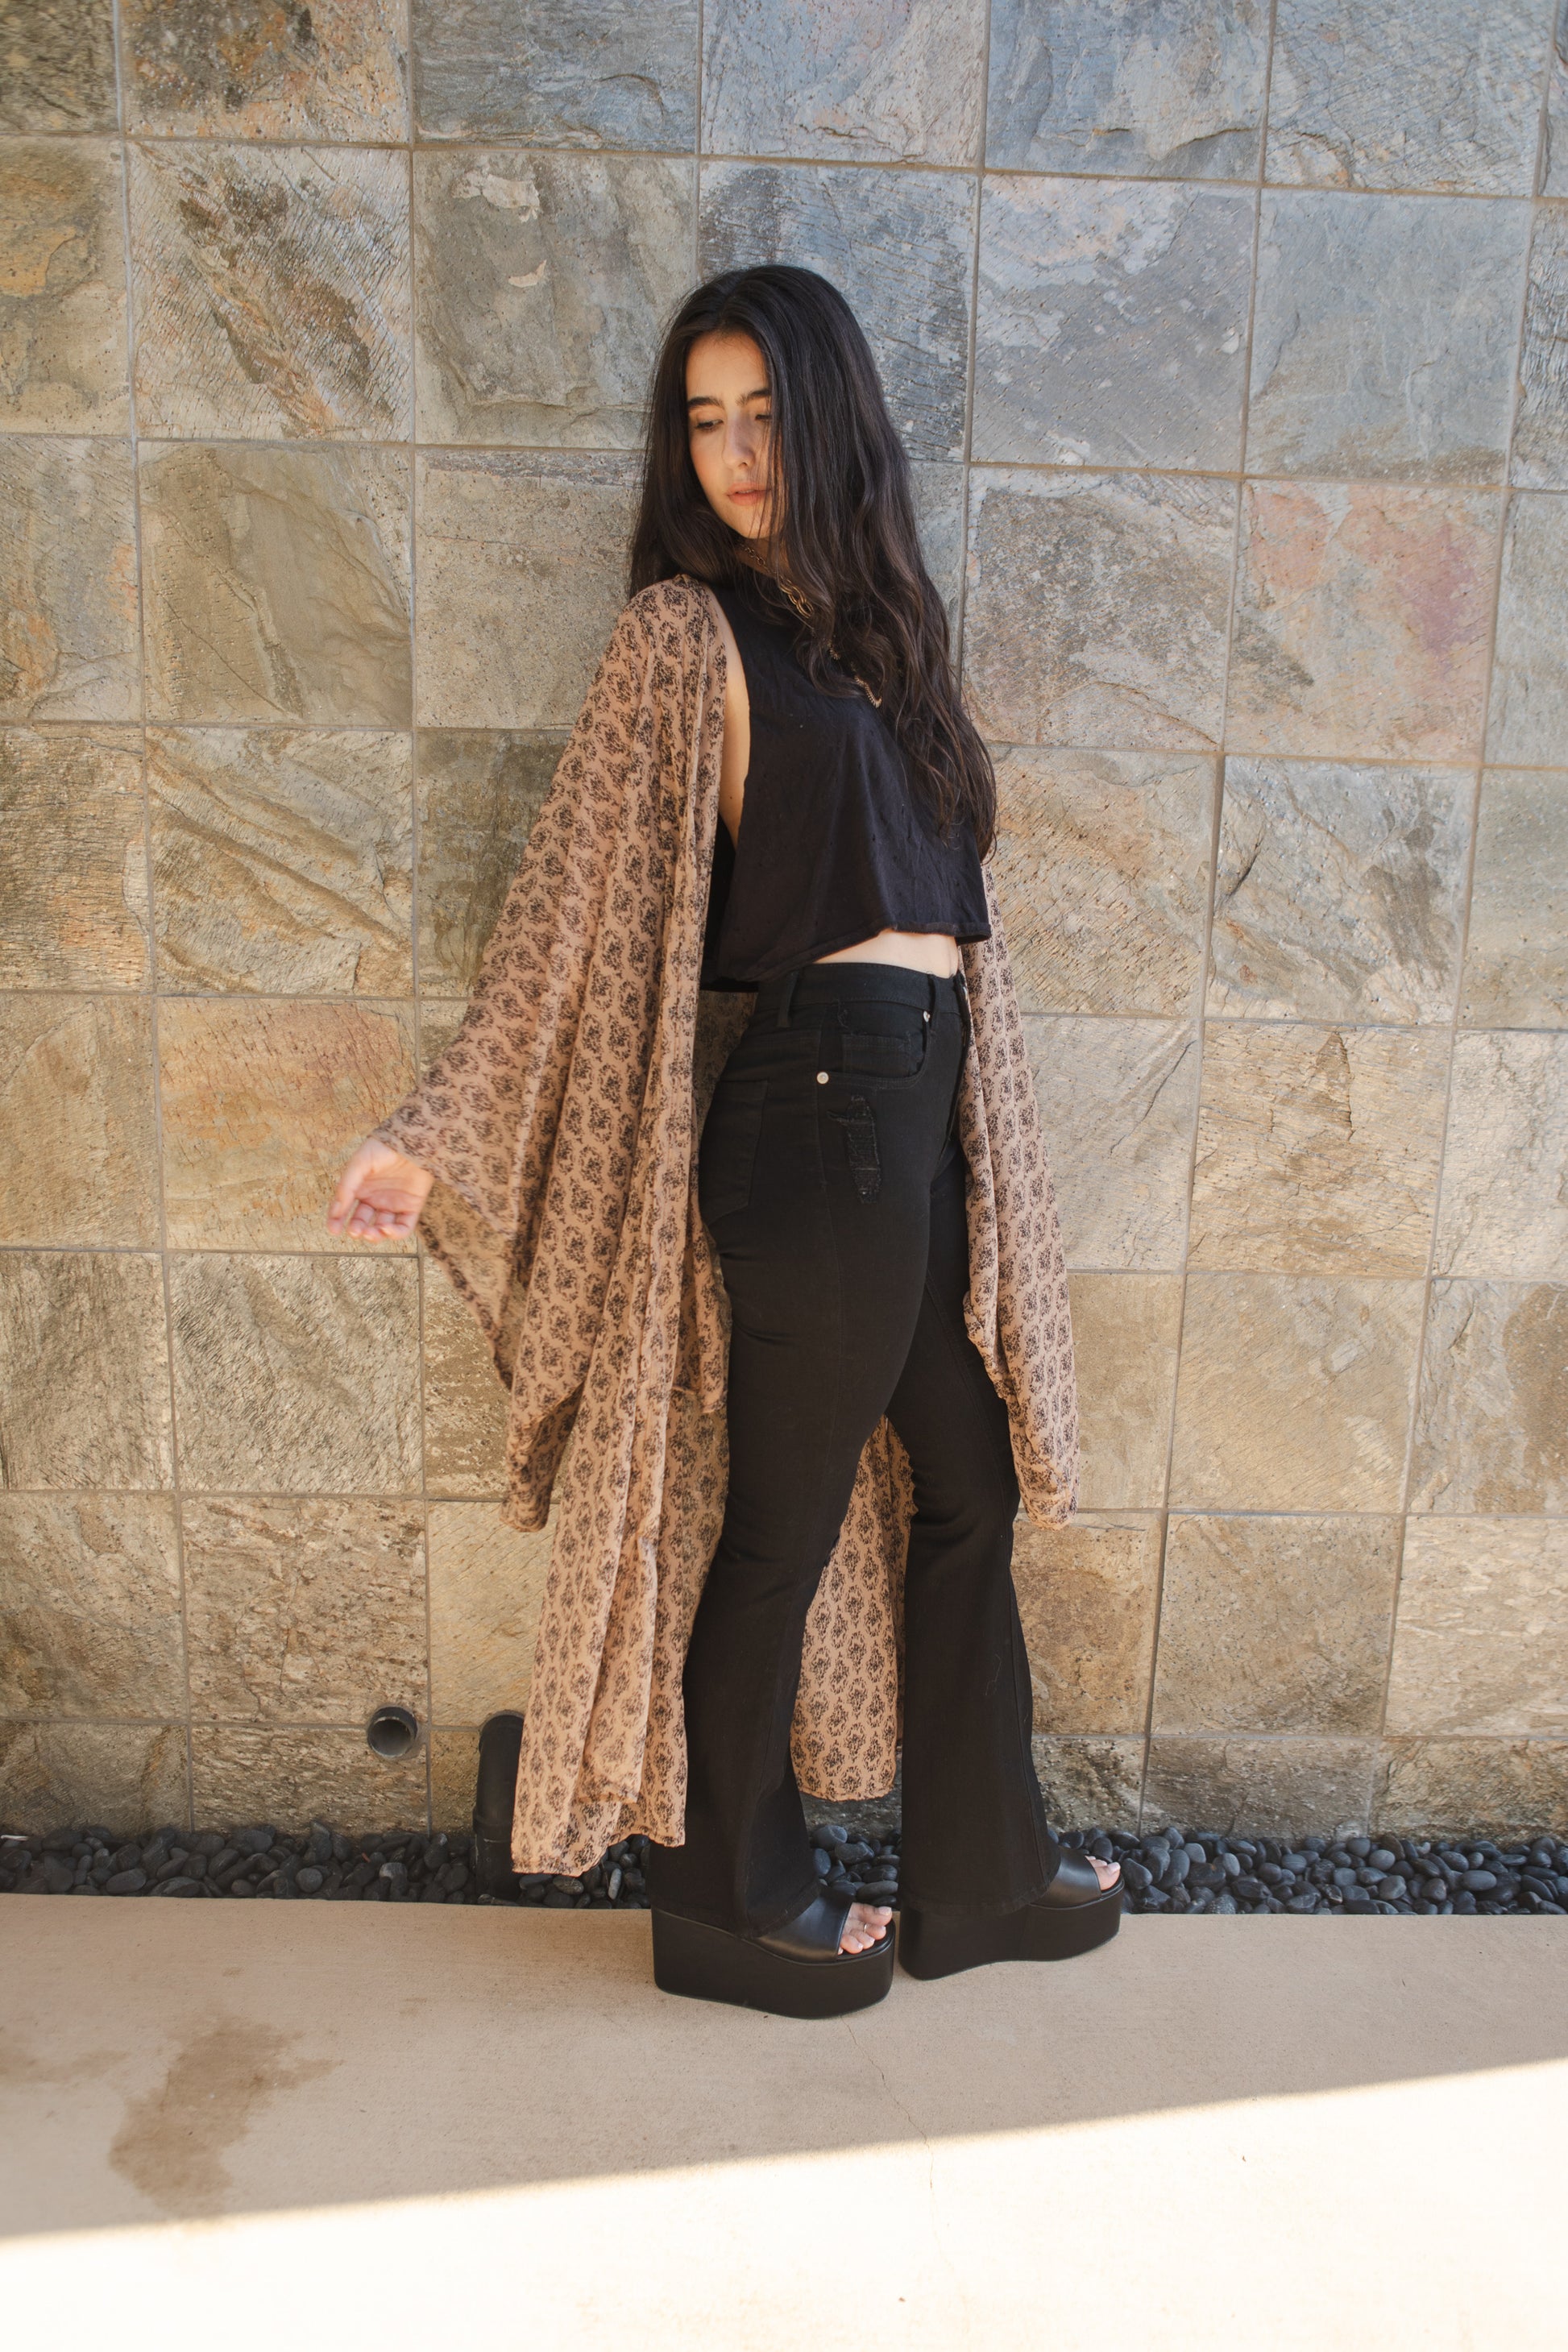 jennafer grace Dado kimono taupe beige brown black victorian gothic vintage inspired coverup wrap dress with pockets duster jacket robe goth boho bohemian hippie whimsical romantic beach poolside resort cabana lounge wear unisex handmade in California USA